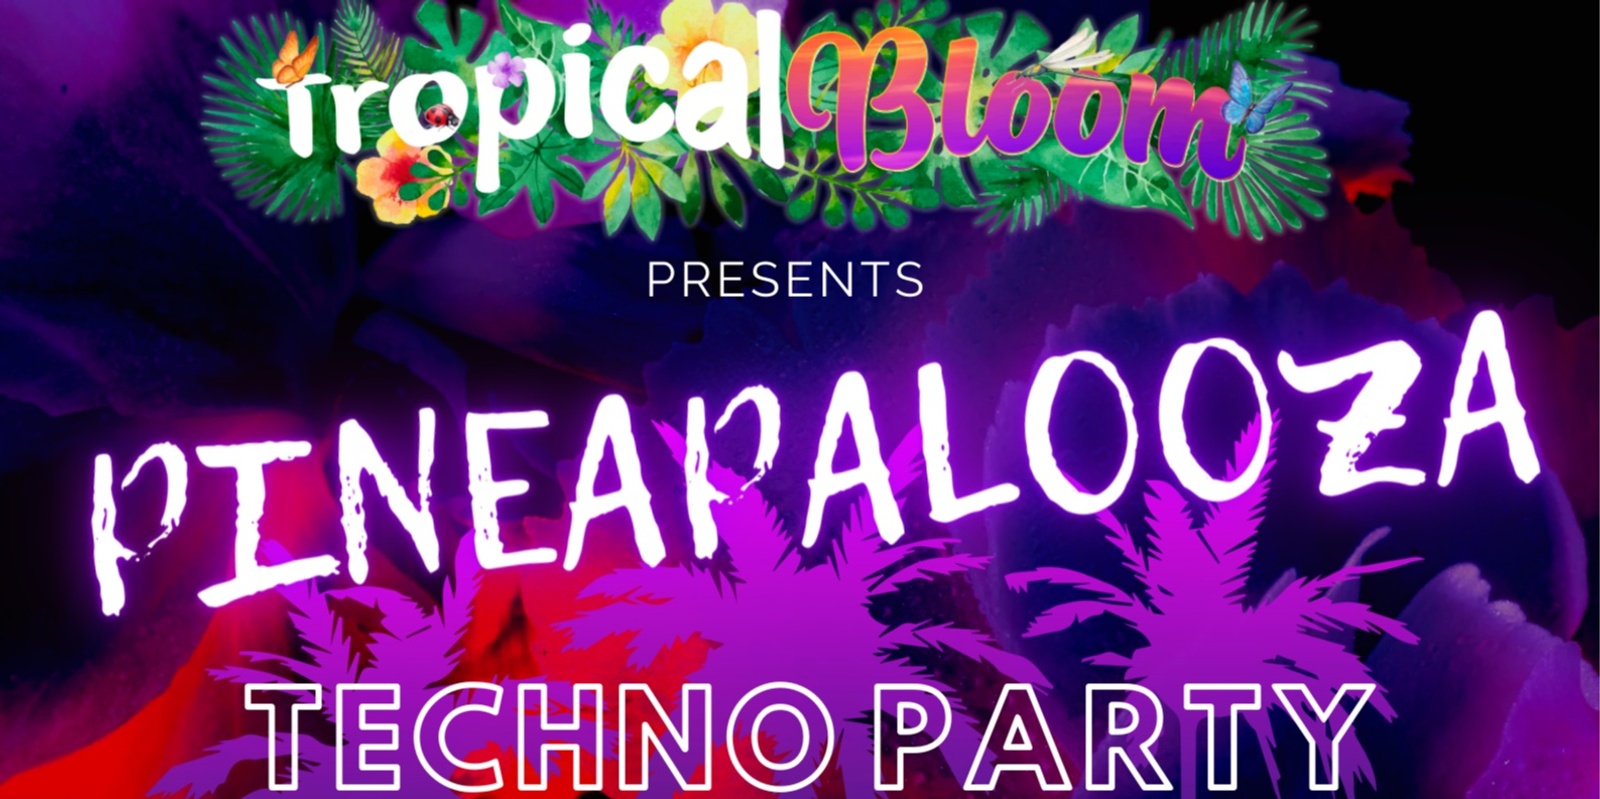 Banner image for Pineapalooza Techno Party